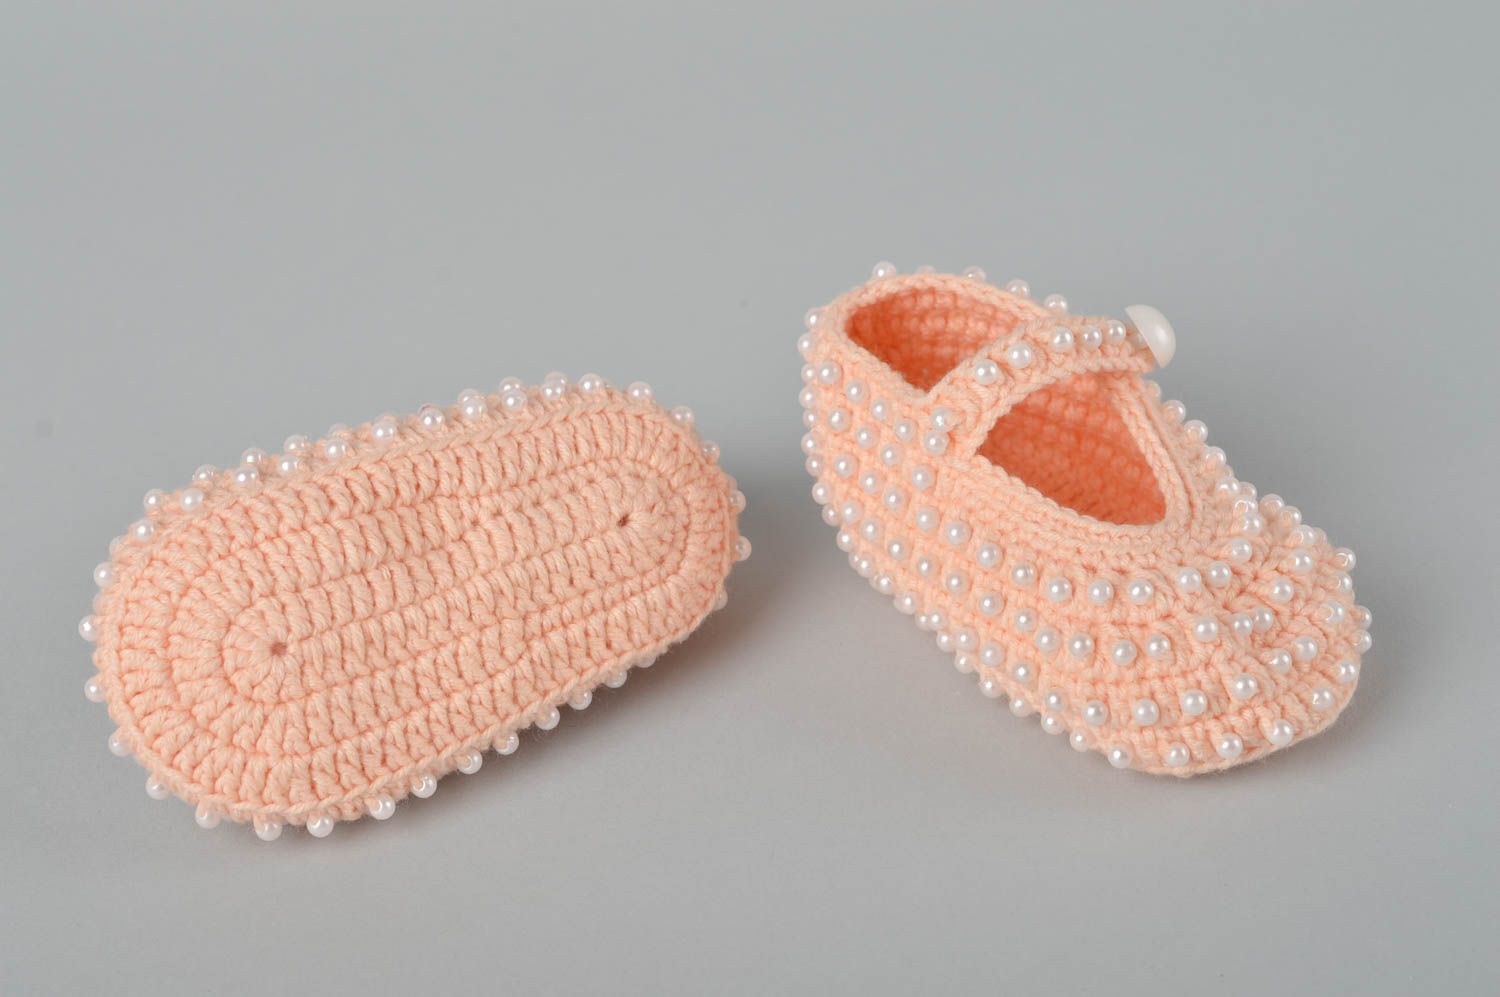 Handmade crocheted baby bootees stylish warm home shoes cute kids shoes photo 2